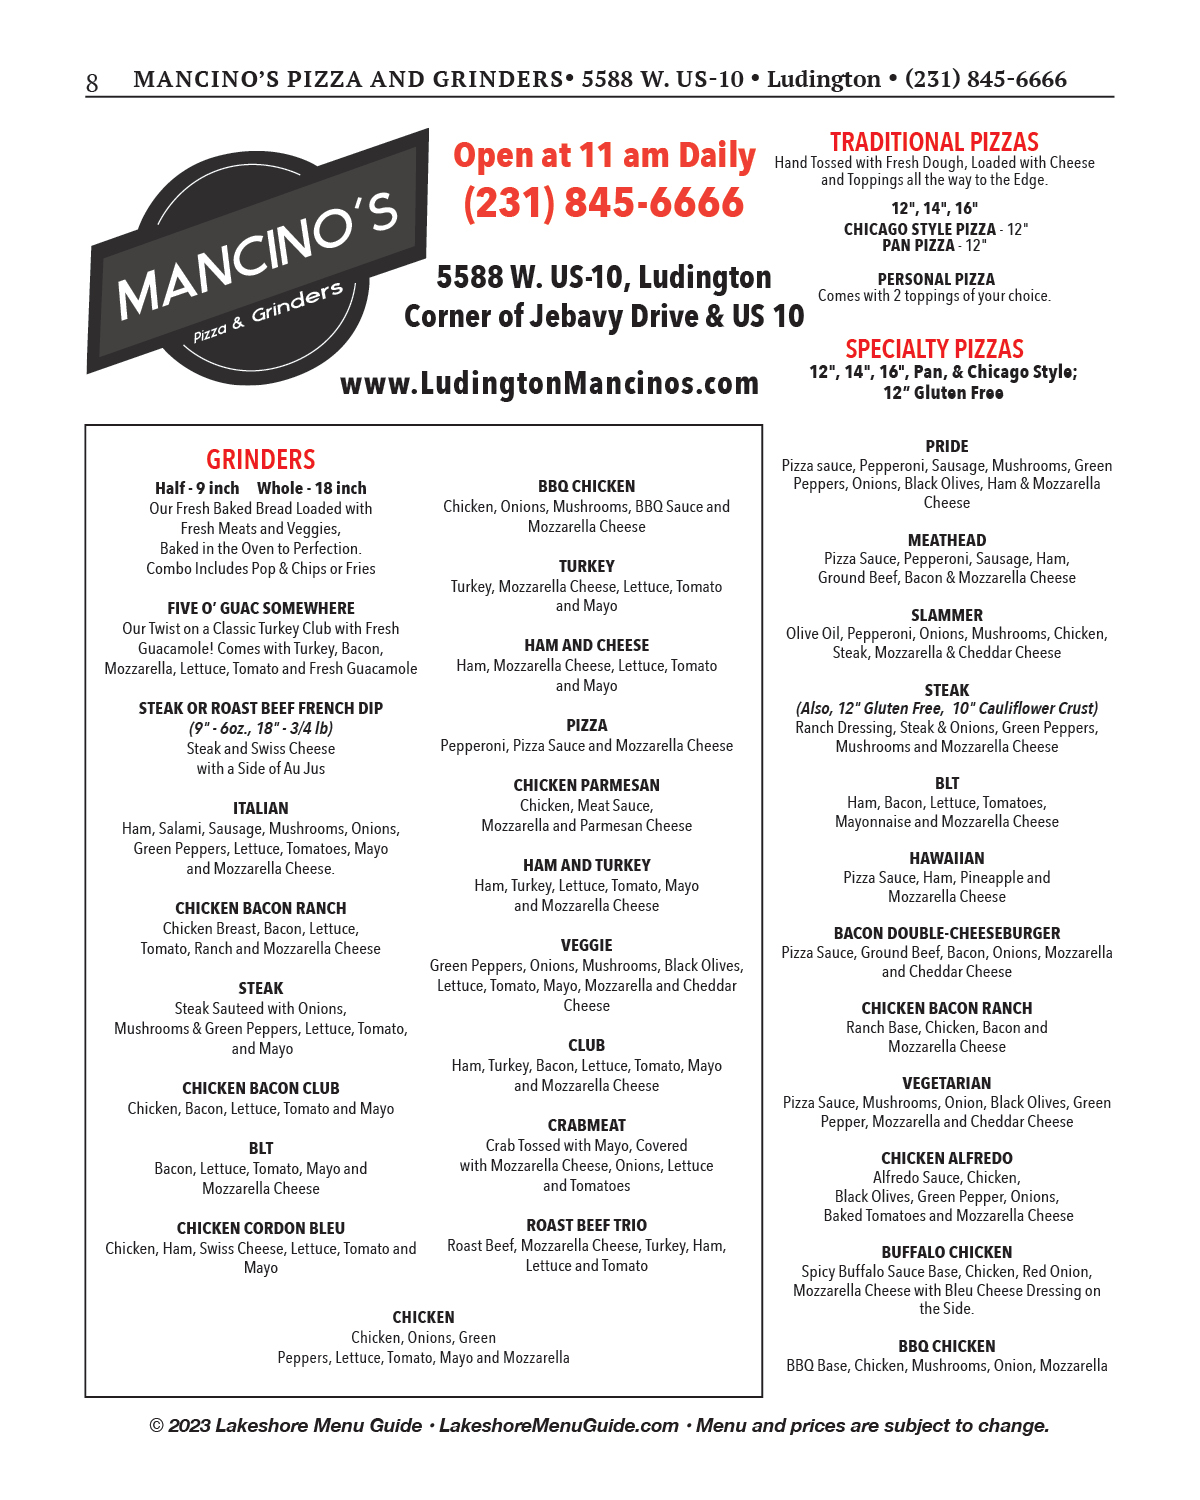 Menu for Mancinos Pizza and Grinders in Ludington from the Lakeshore Menu Guide